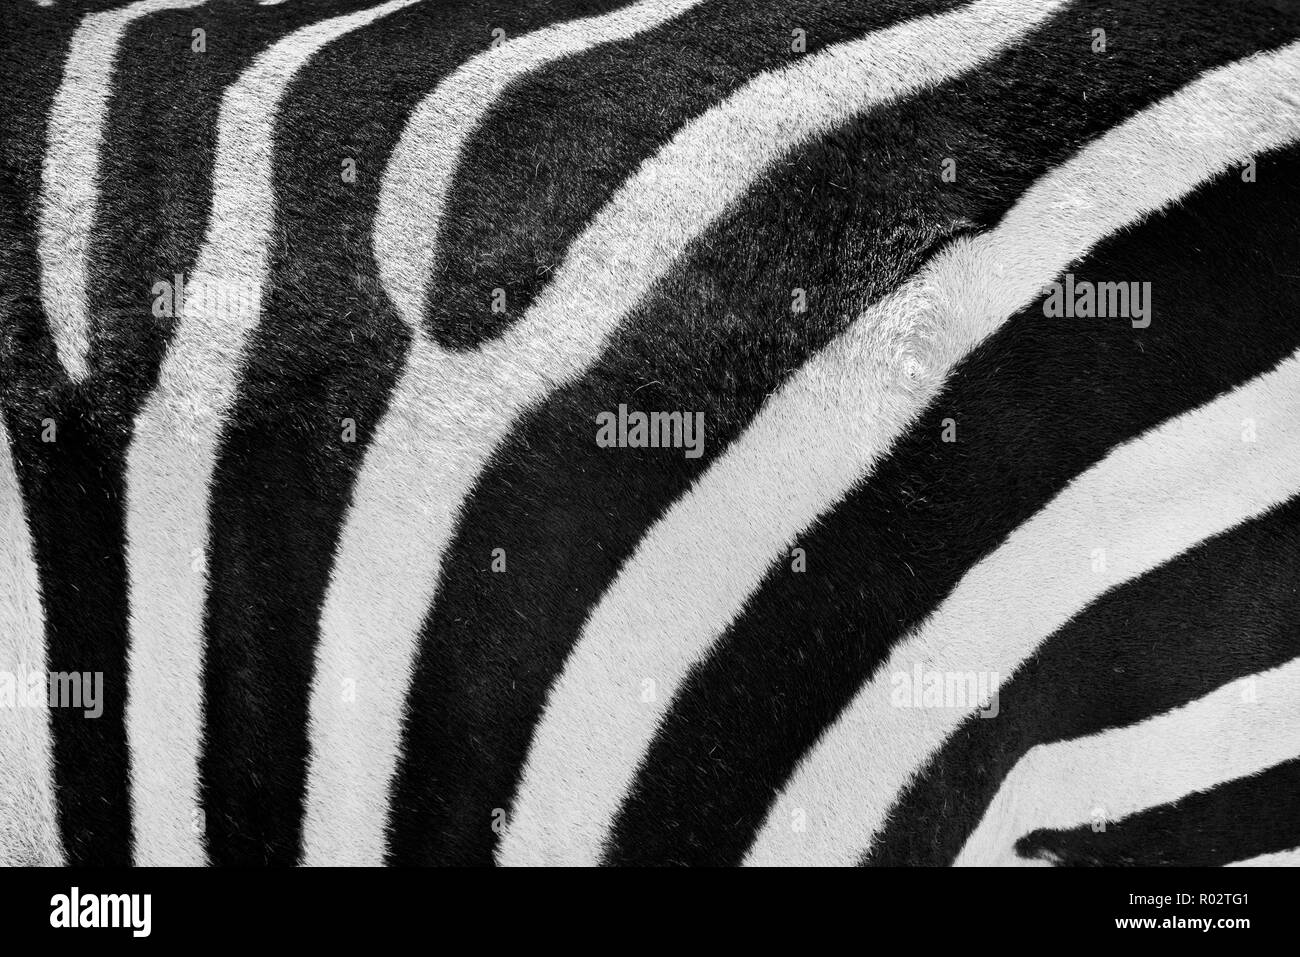 Zebra skin or fur real black and white texture or background photography Stock Photo